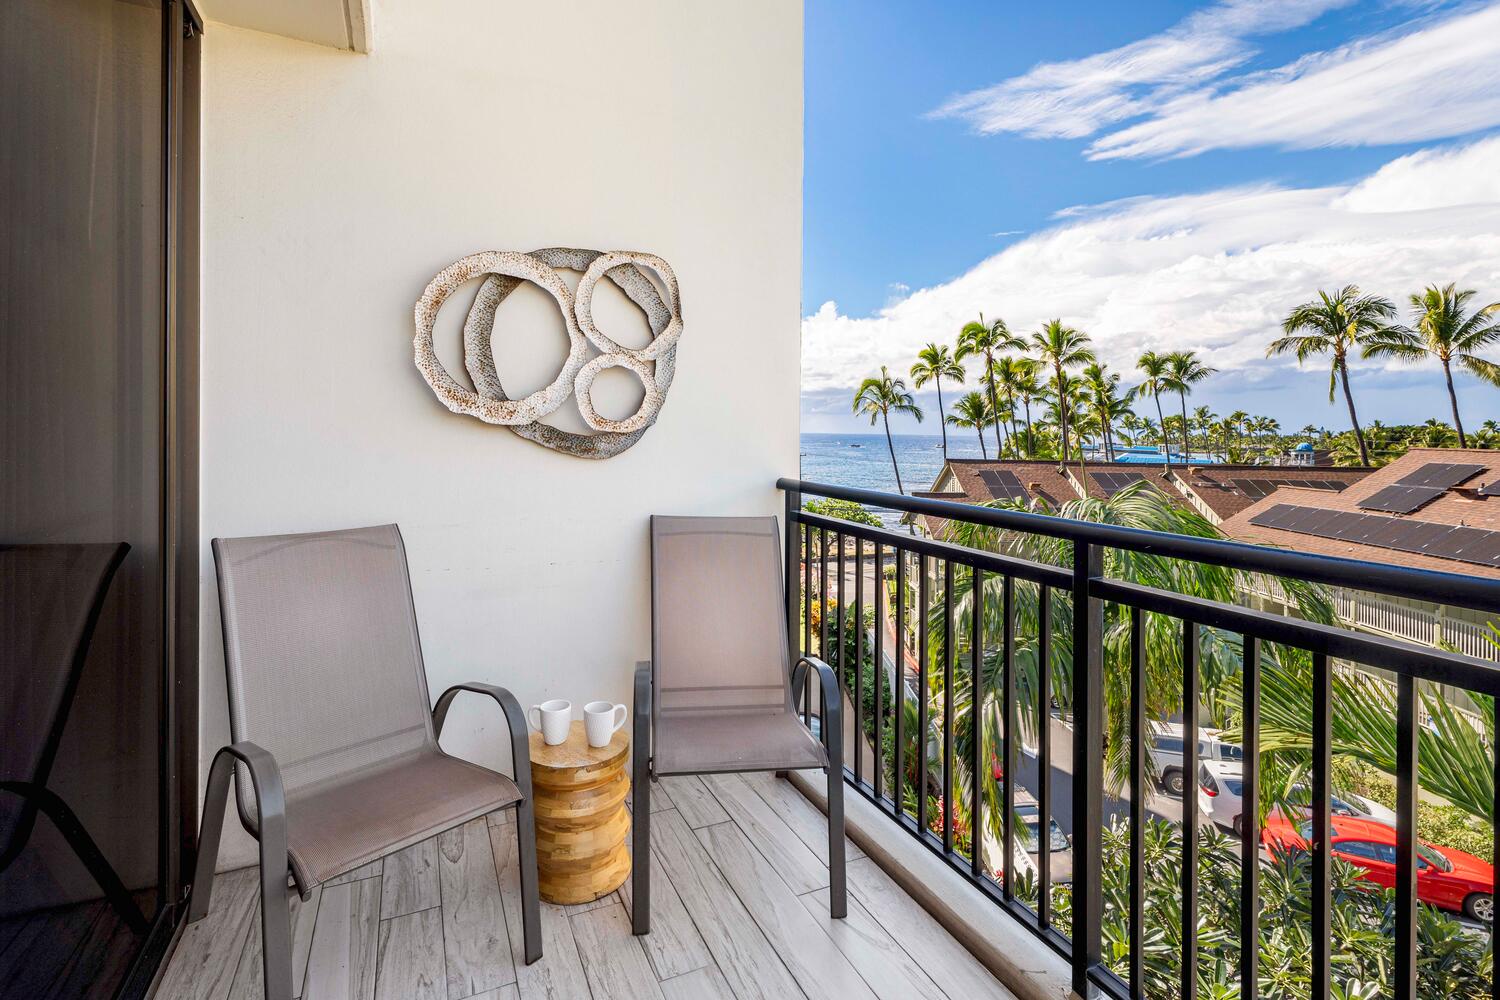 Kailua Kona Vacation Rentals, Kona Alii 512 - Share meaningful conversations while looking at the views.